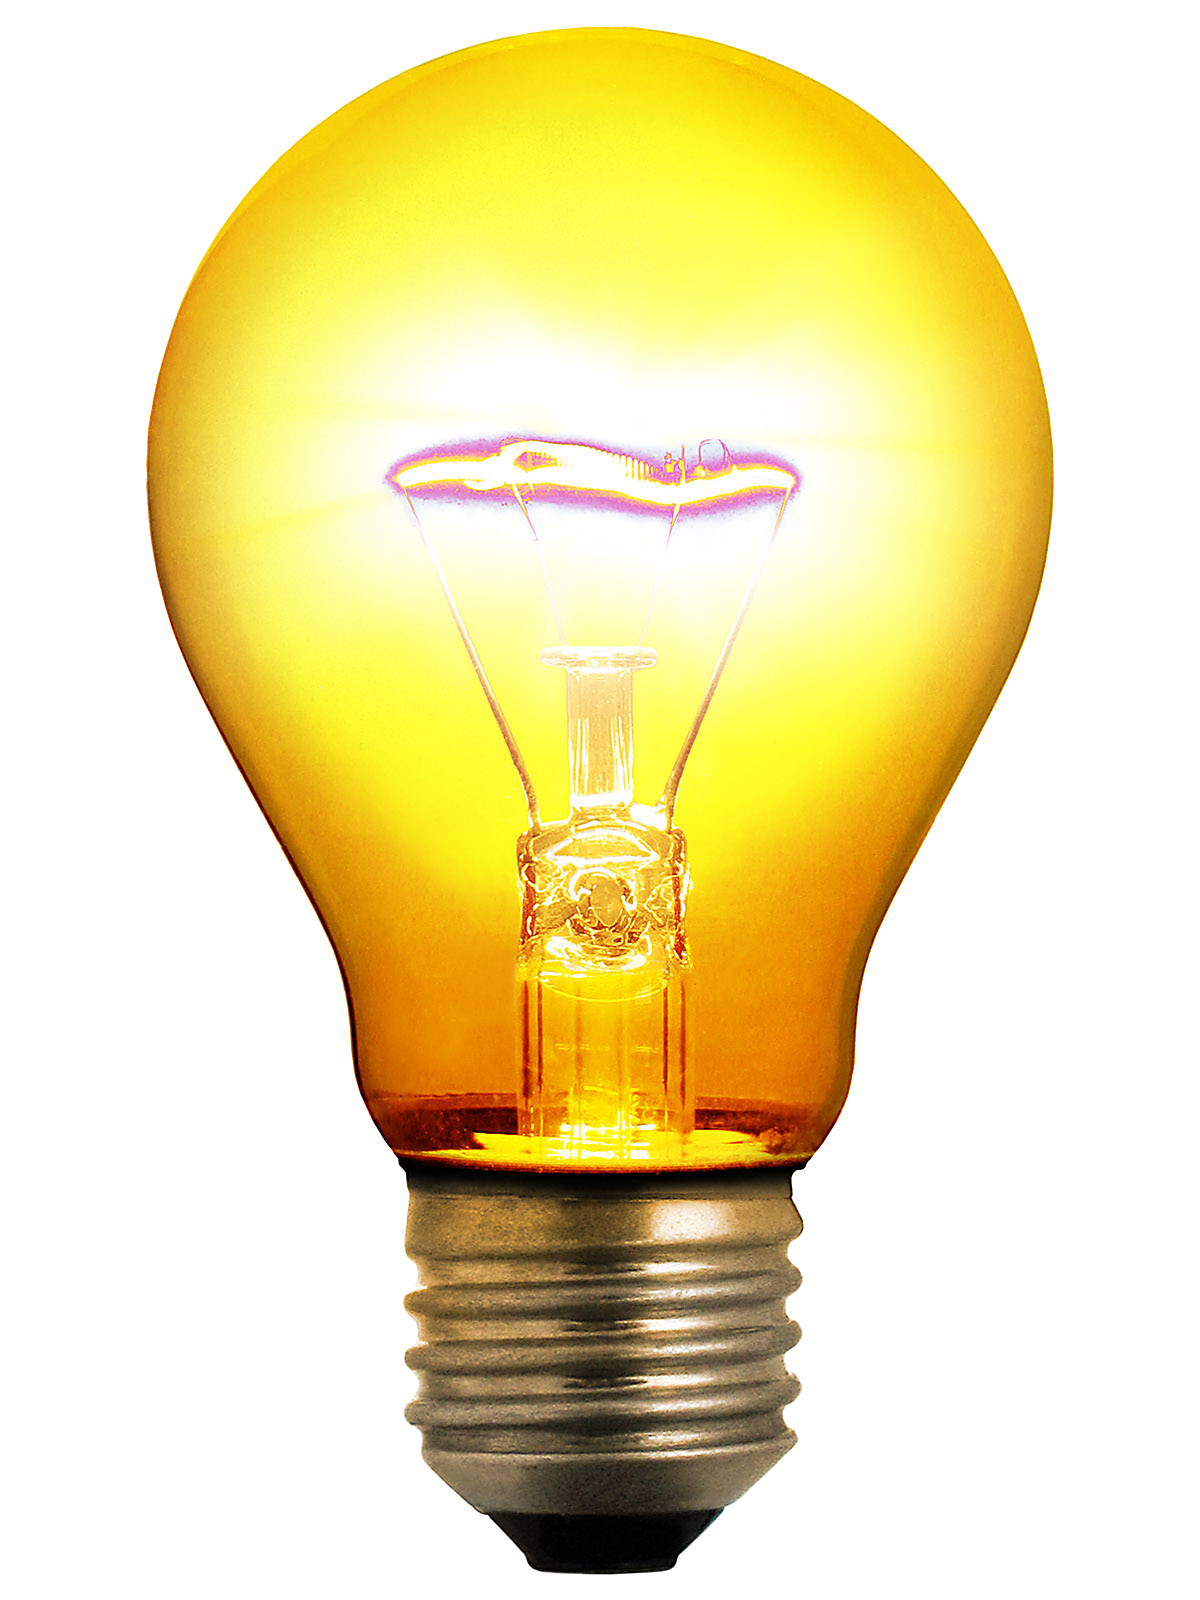 yellow light Bulb PNG images Download 